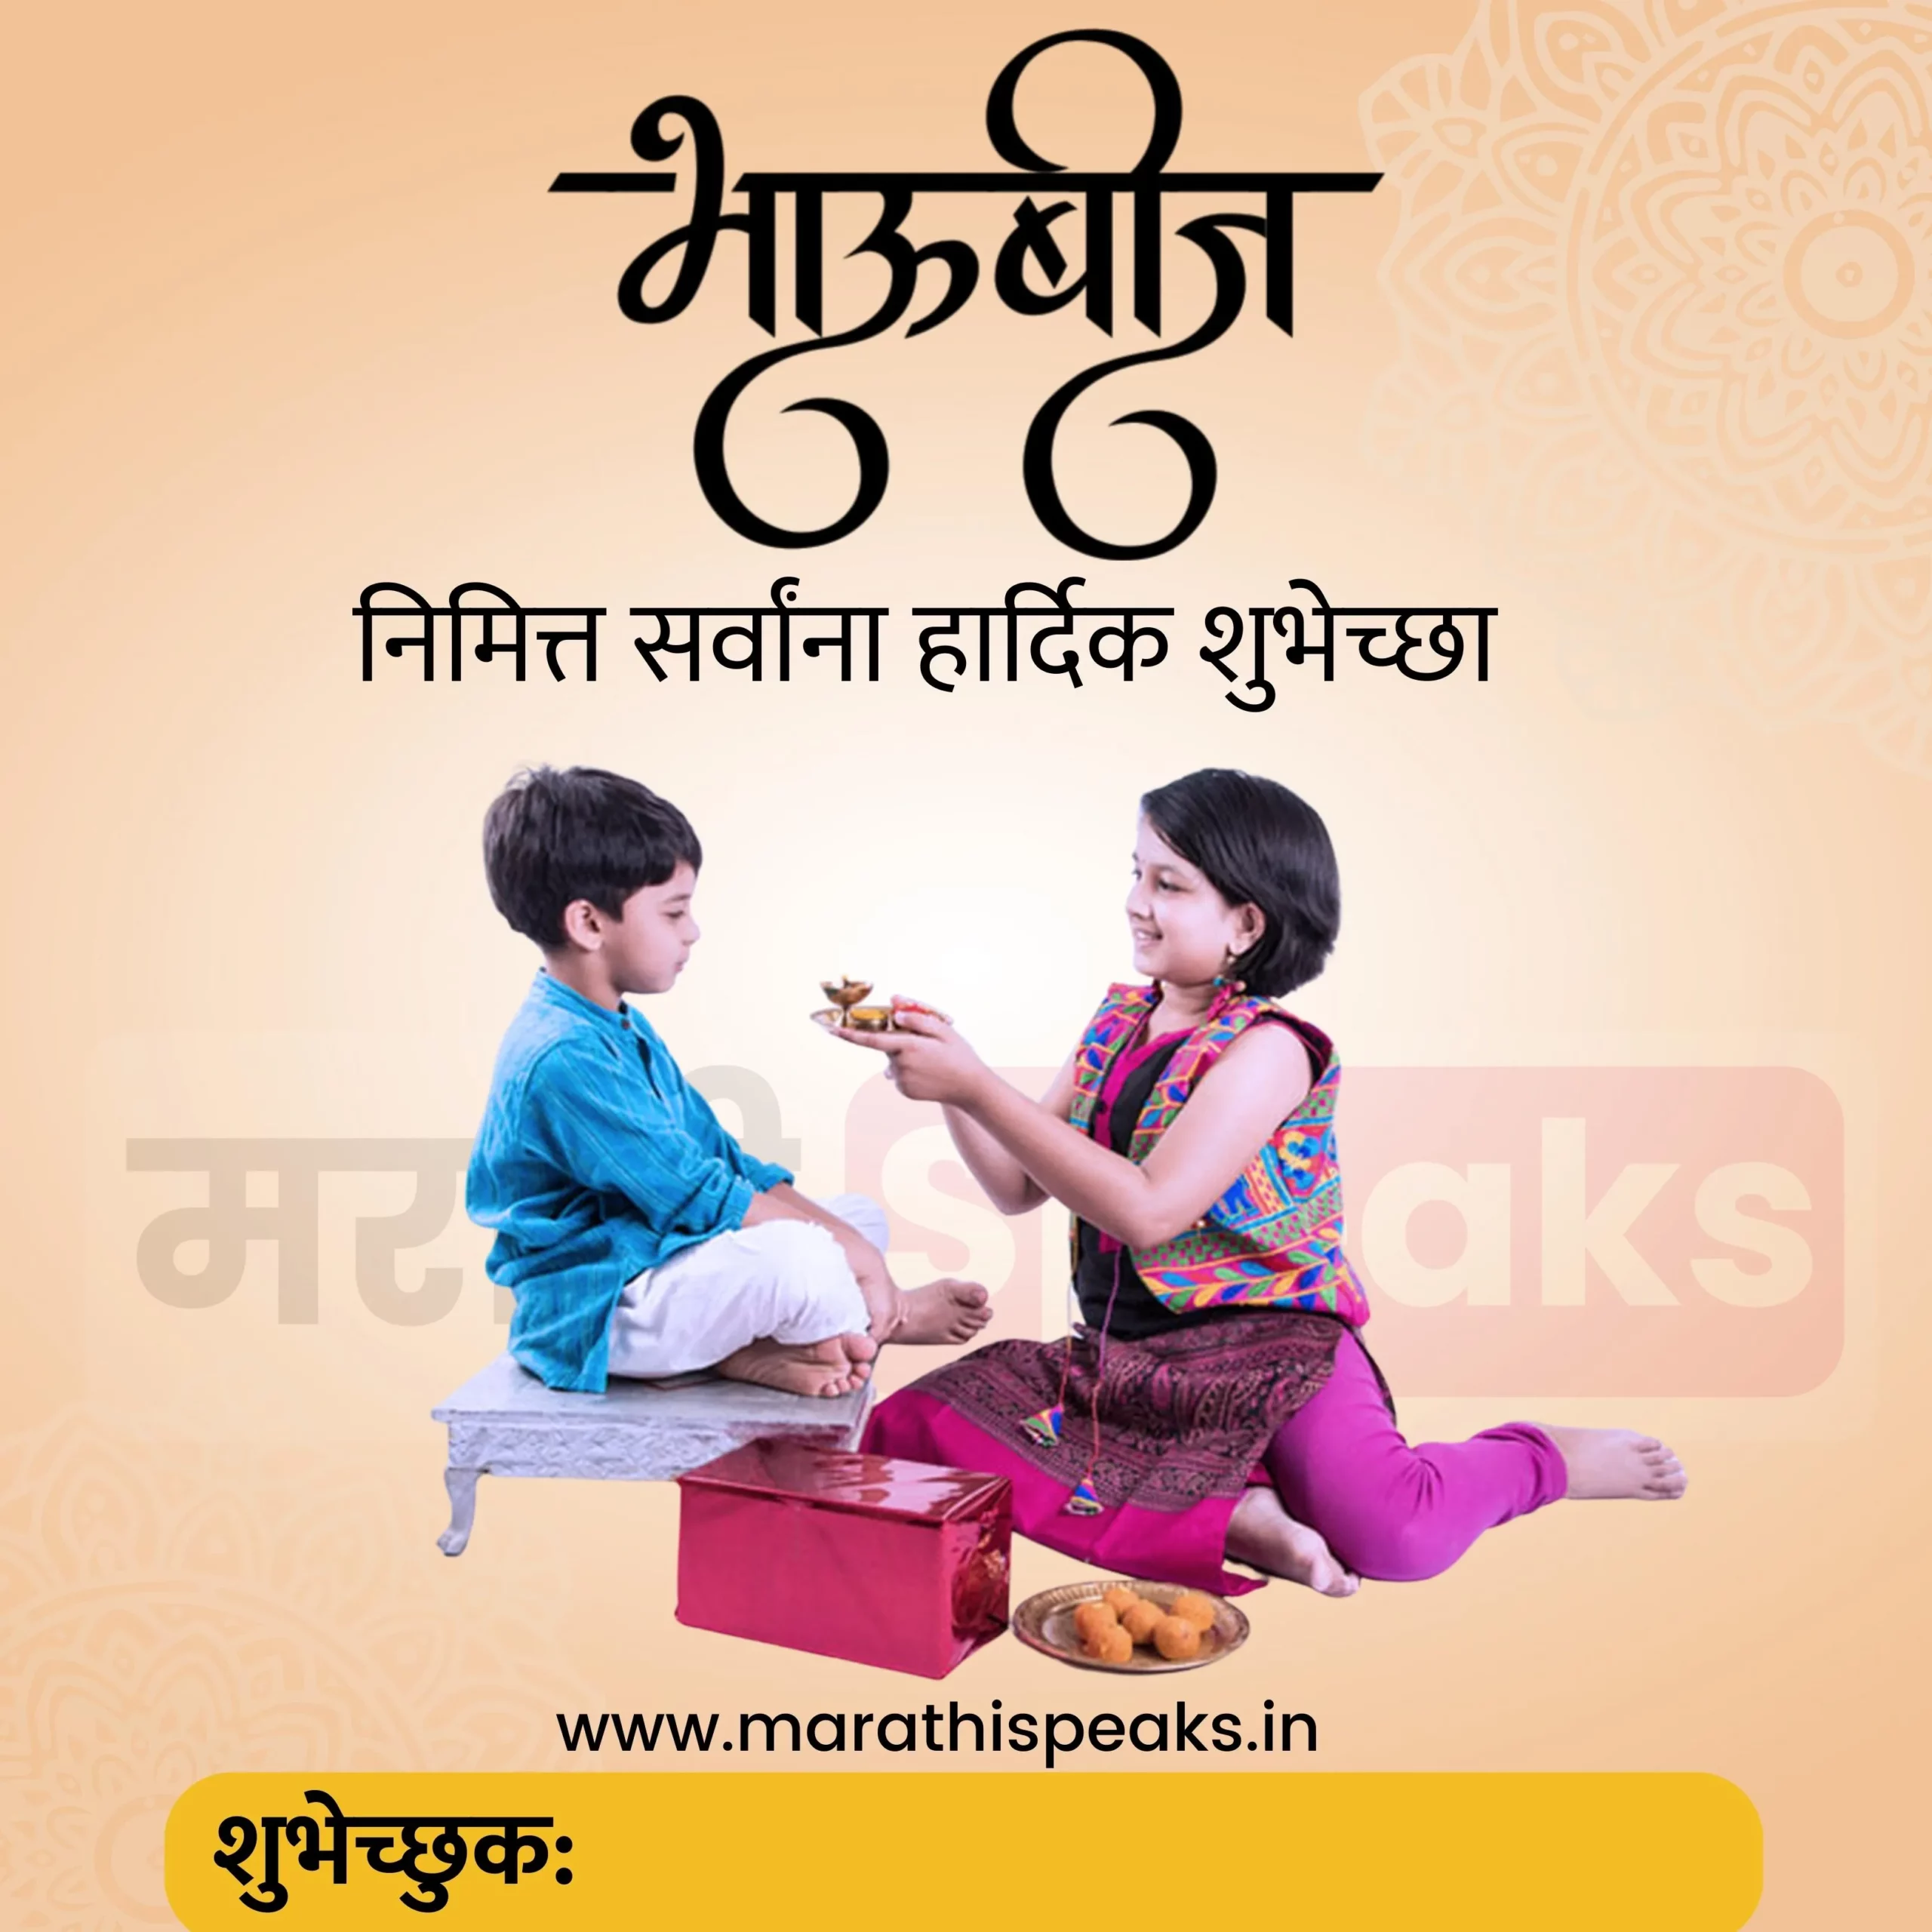 bhaubeej wishes in marathi 2022 hd banner, quotes, shayri, images, photo